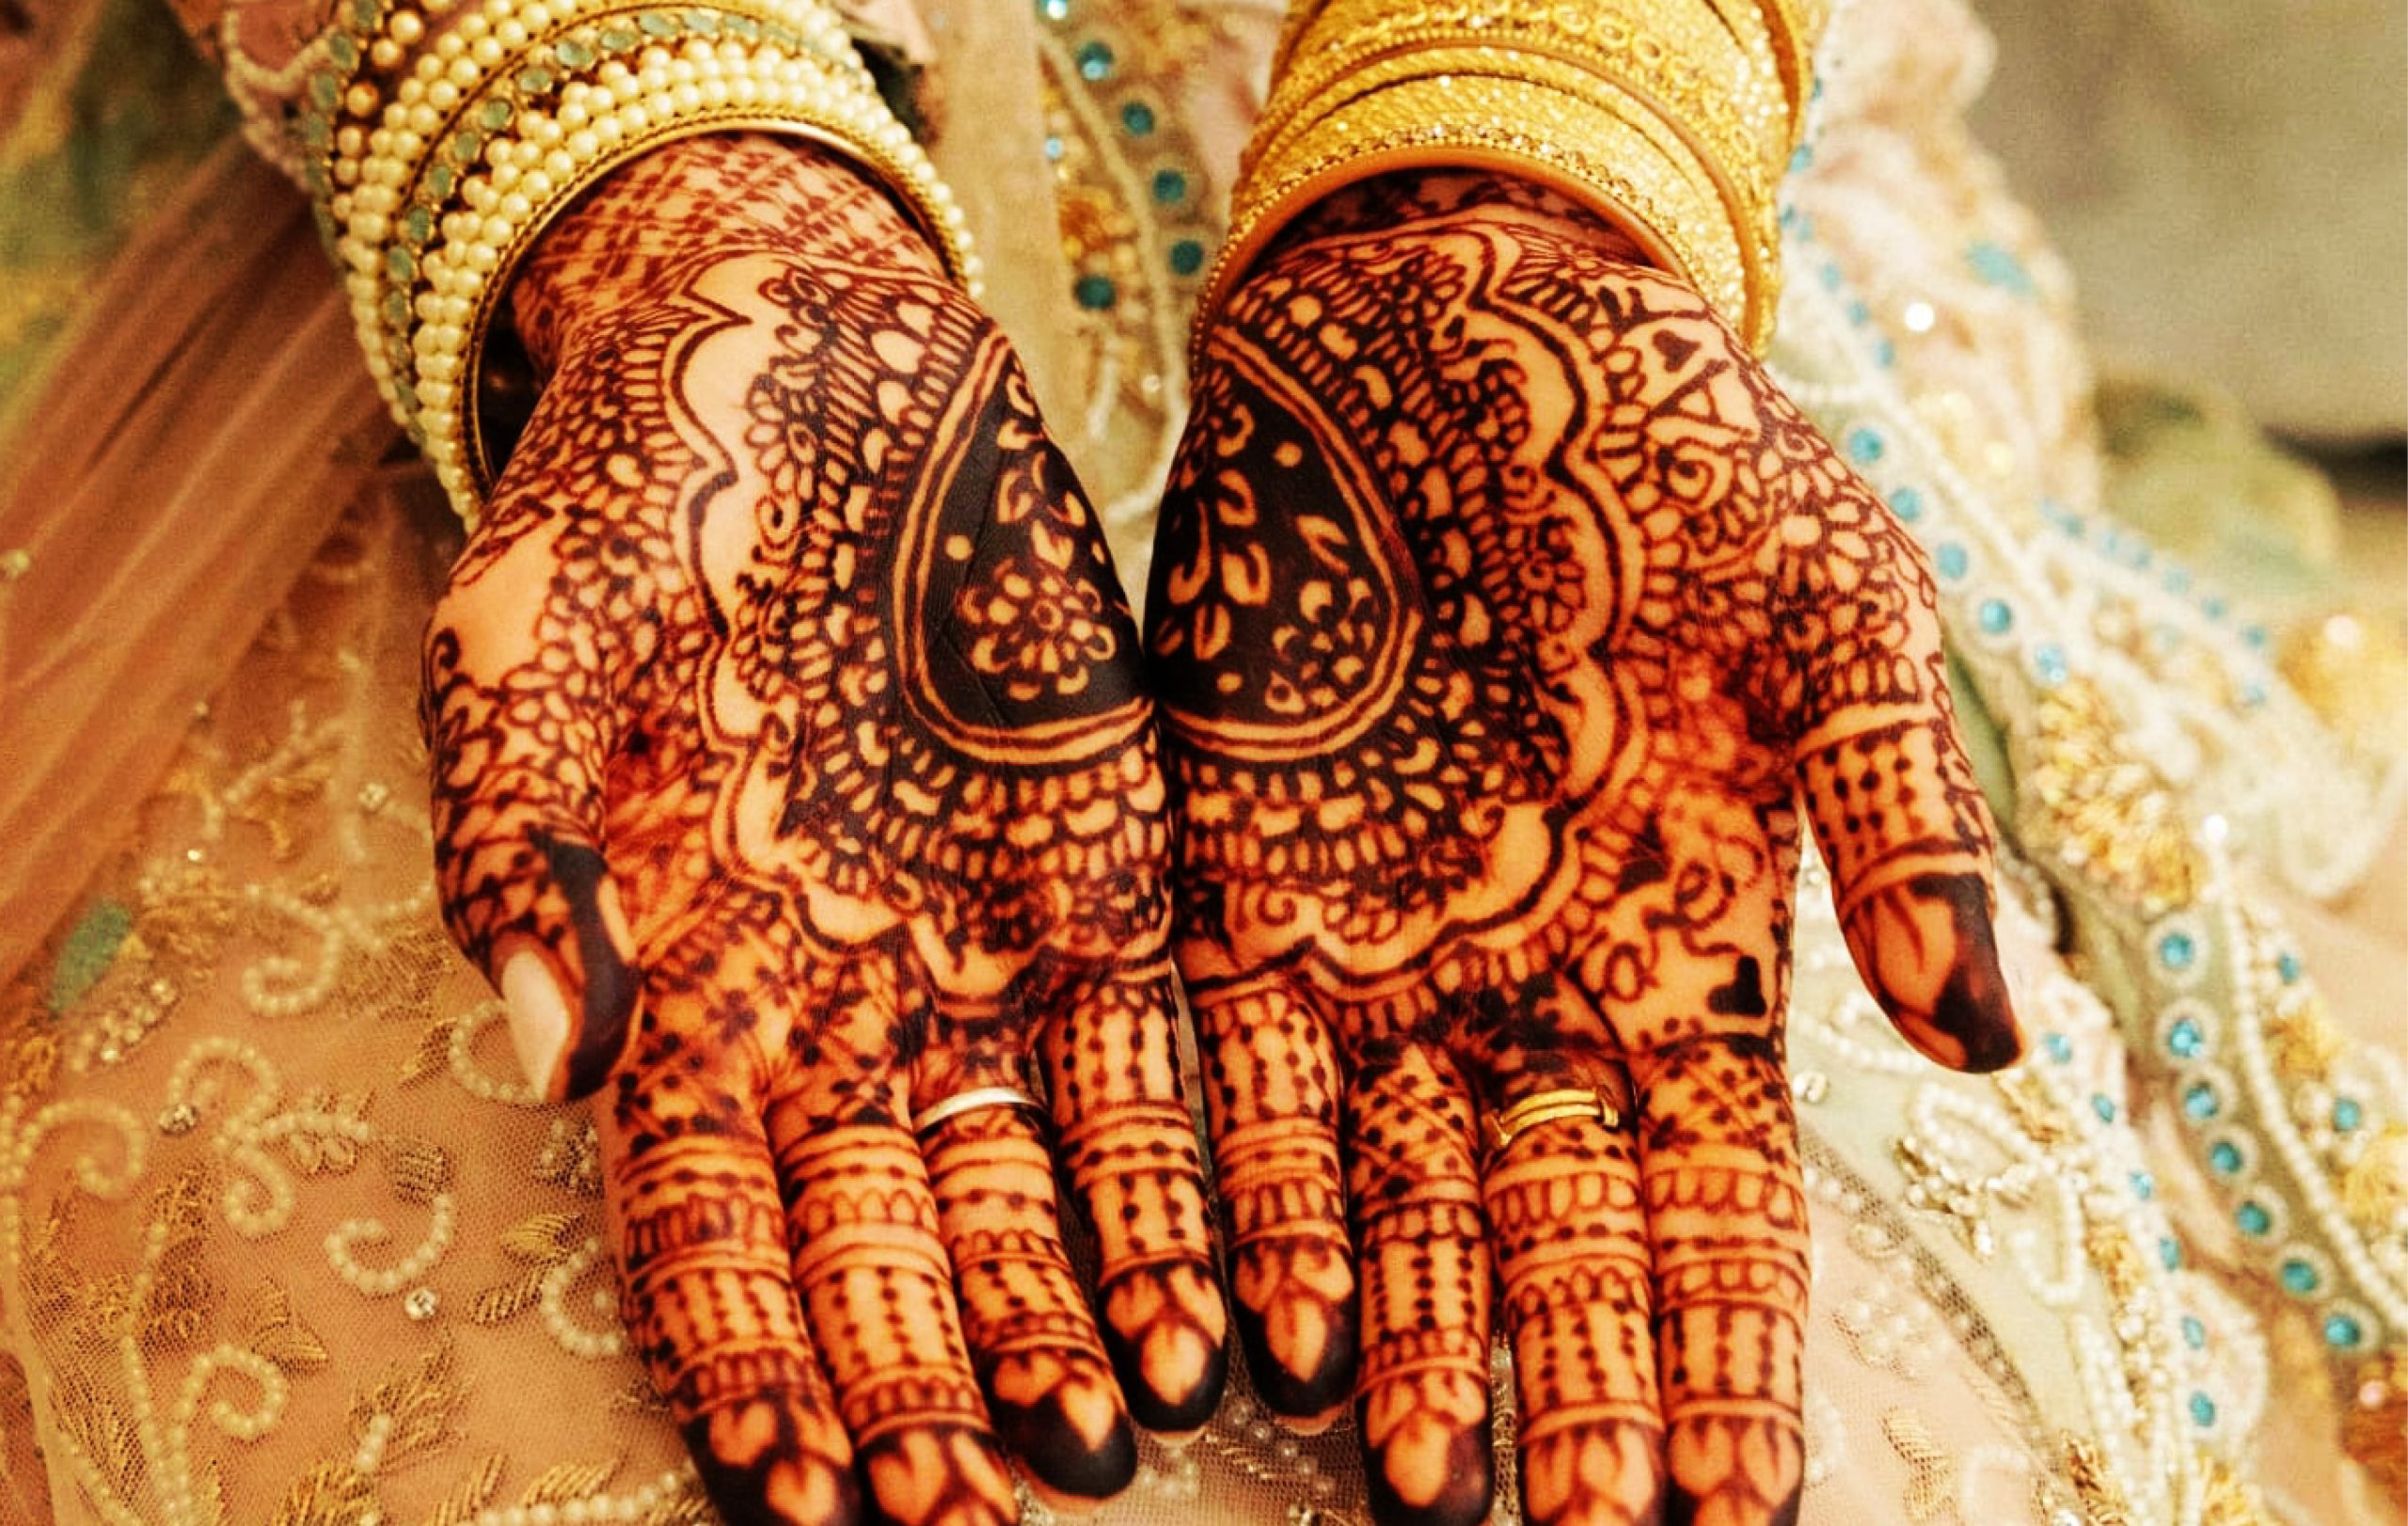 Image of hands decorated in henna